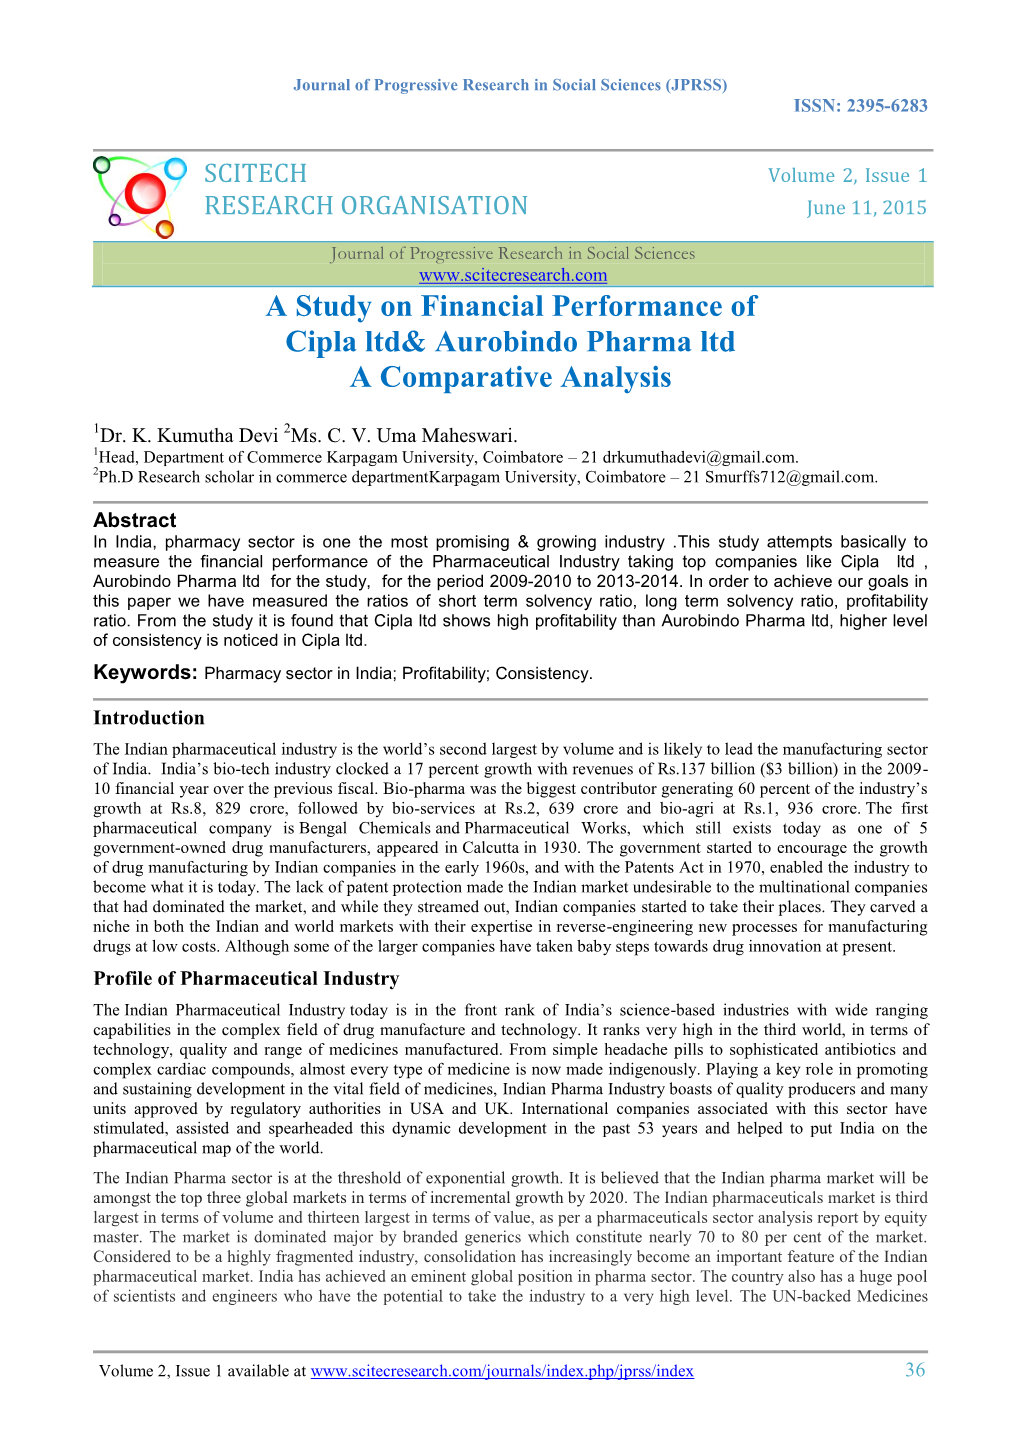 A Study of Financial Performance